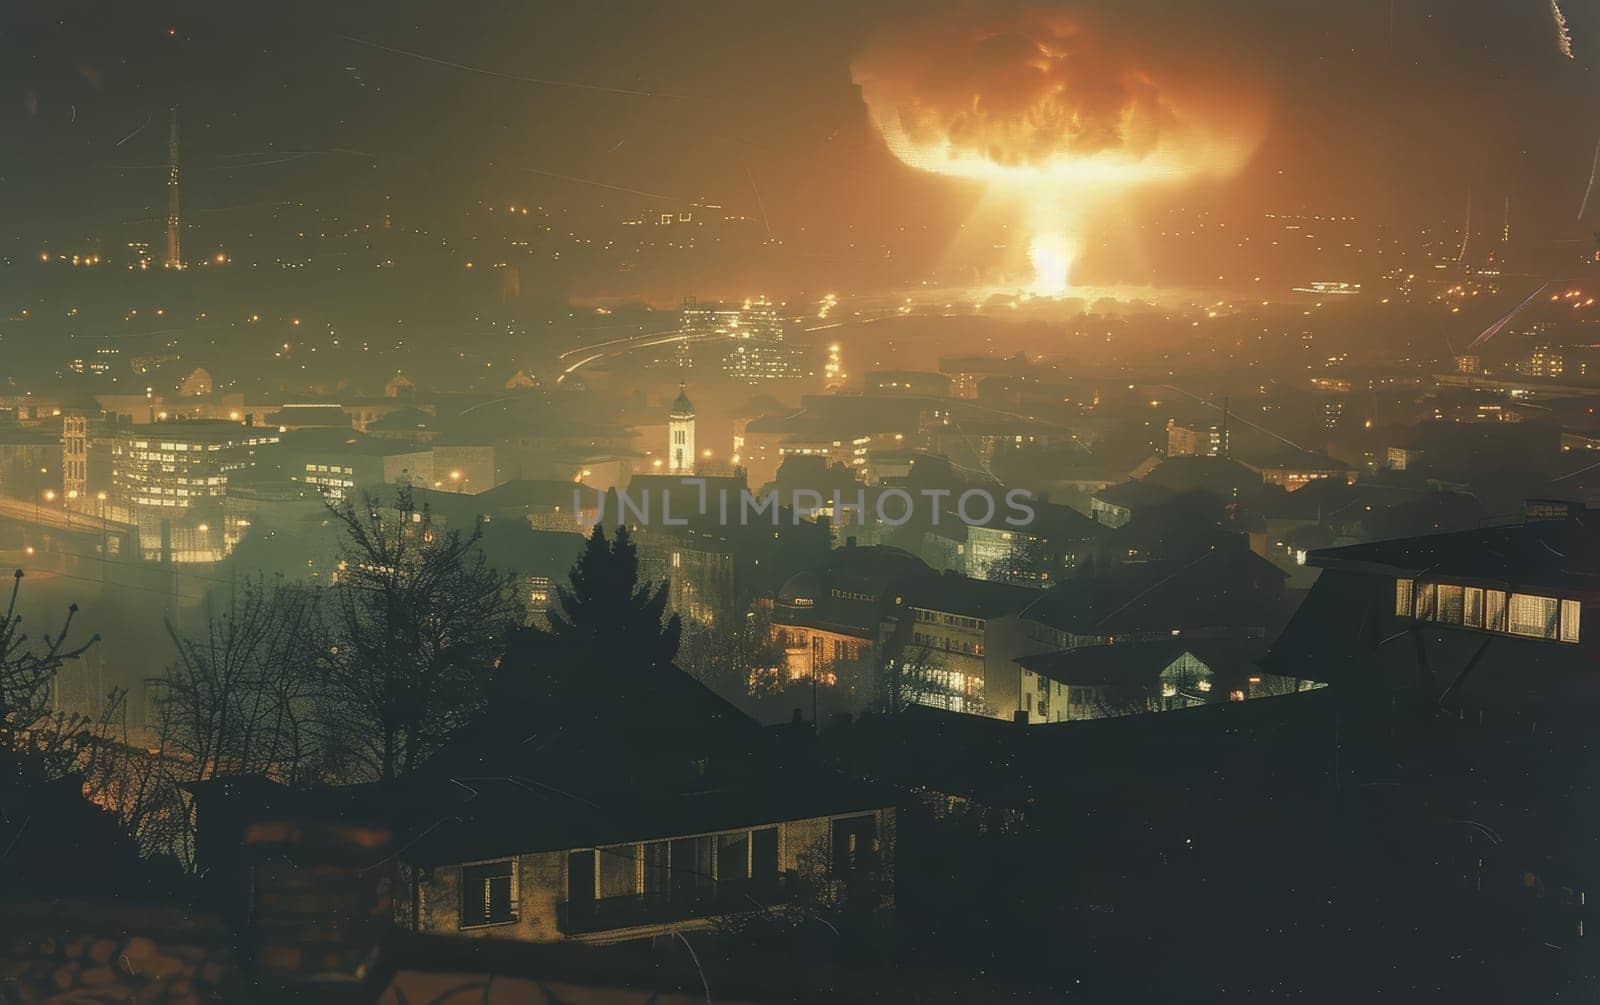 An ominous explosion illuminates a nighttime cityscape, casting a dramatic glow over the urban environment. The event captures a moment of intensity amidst the calm of the city's evening routine.